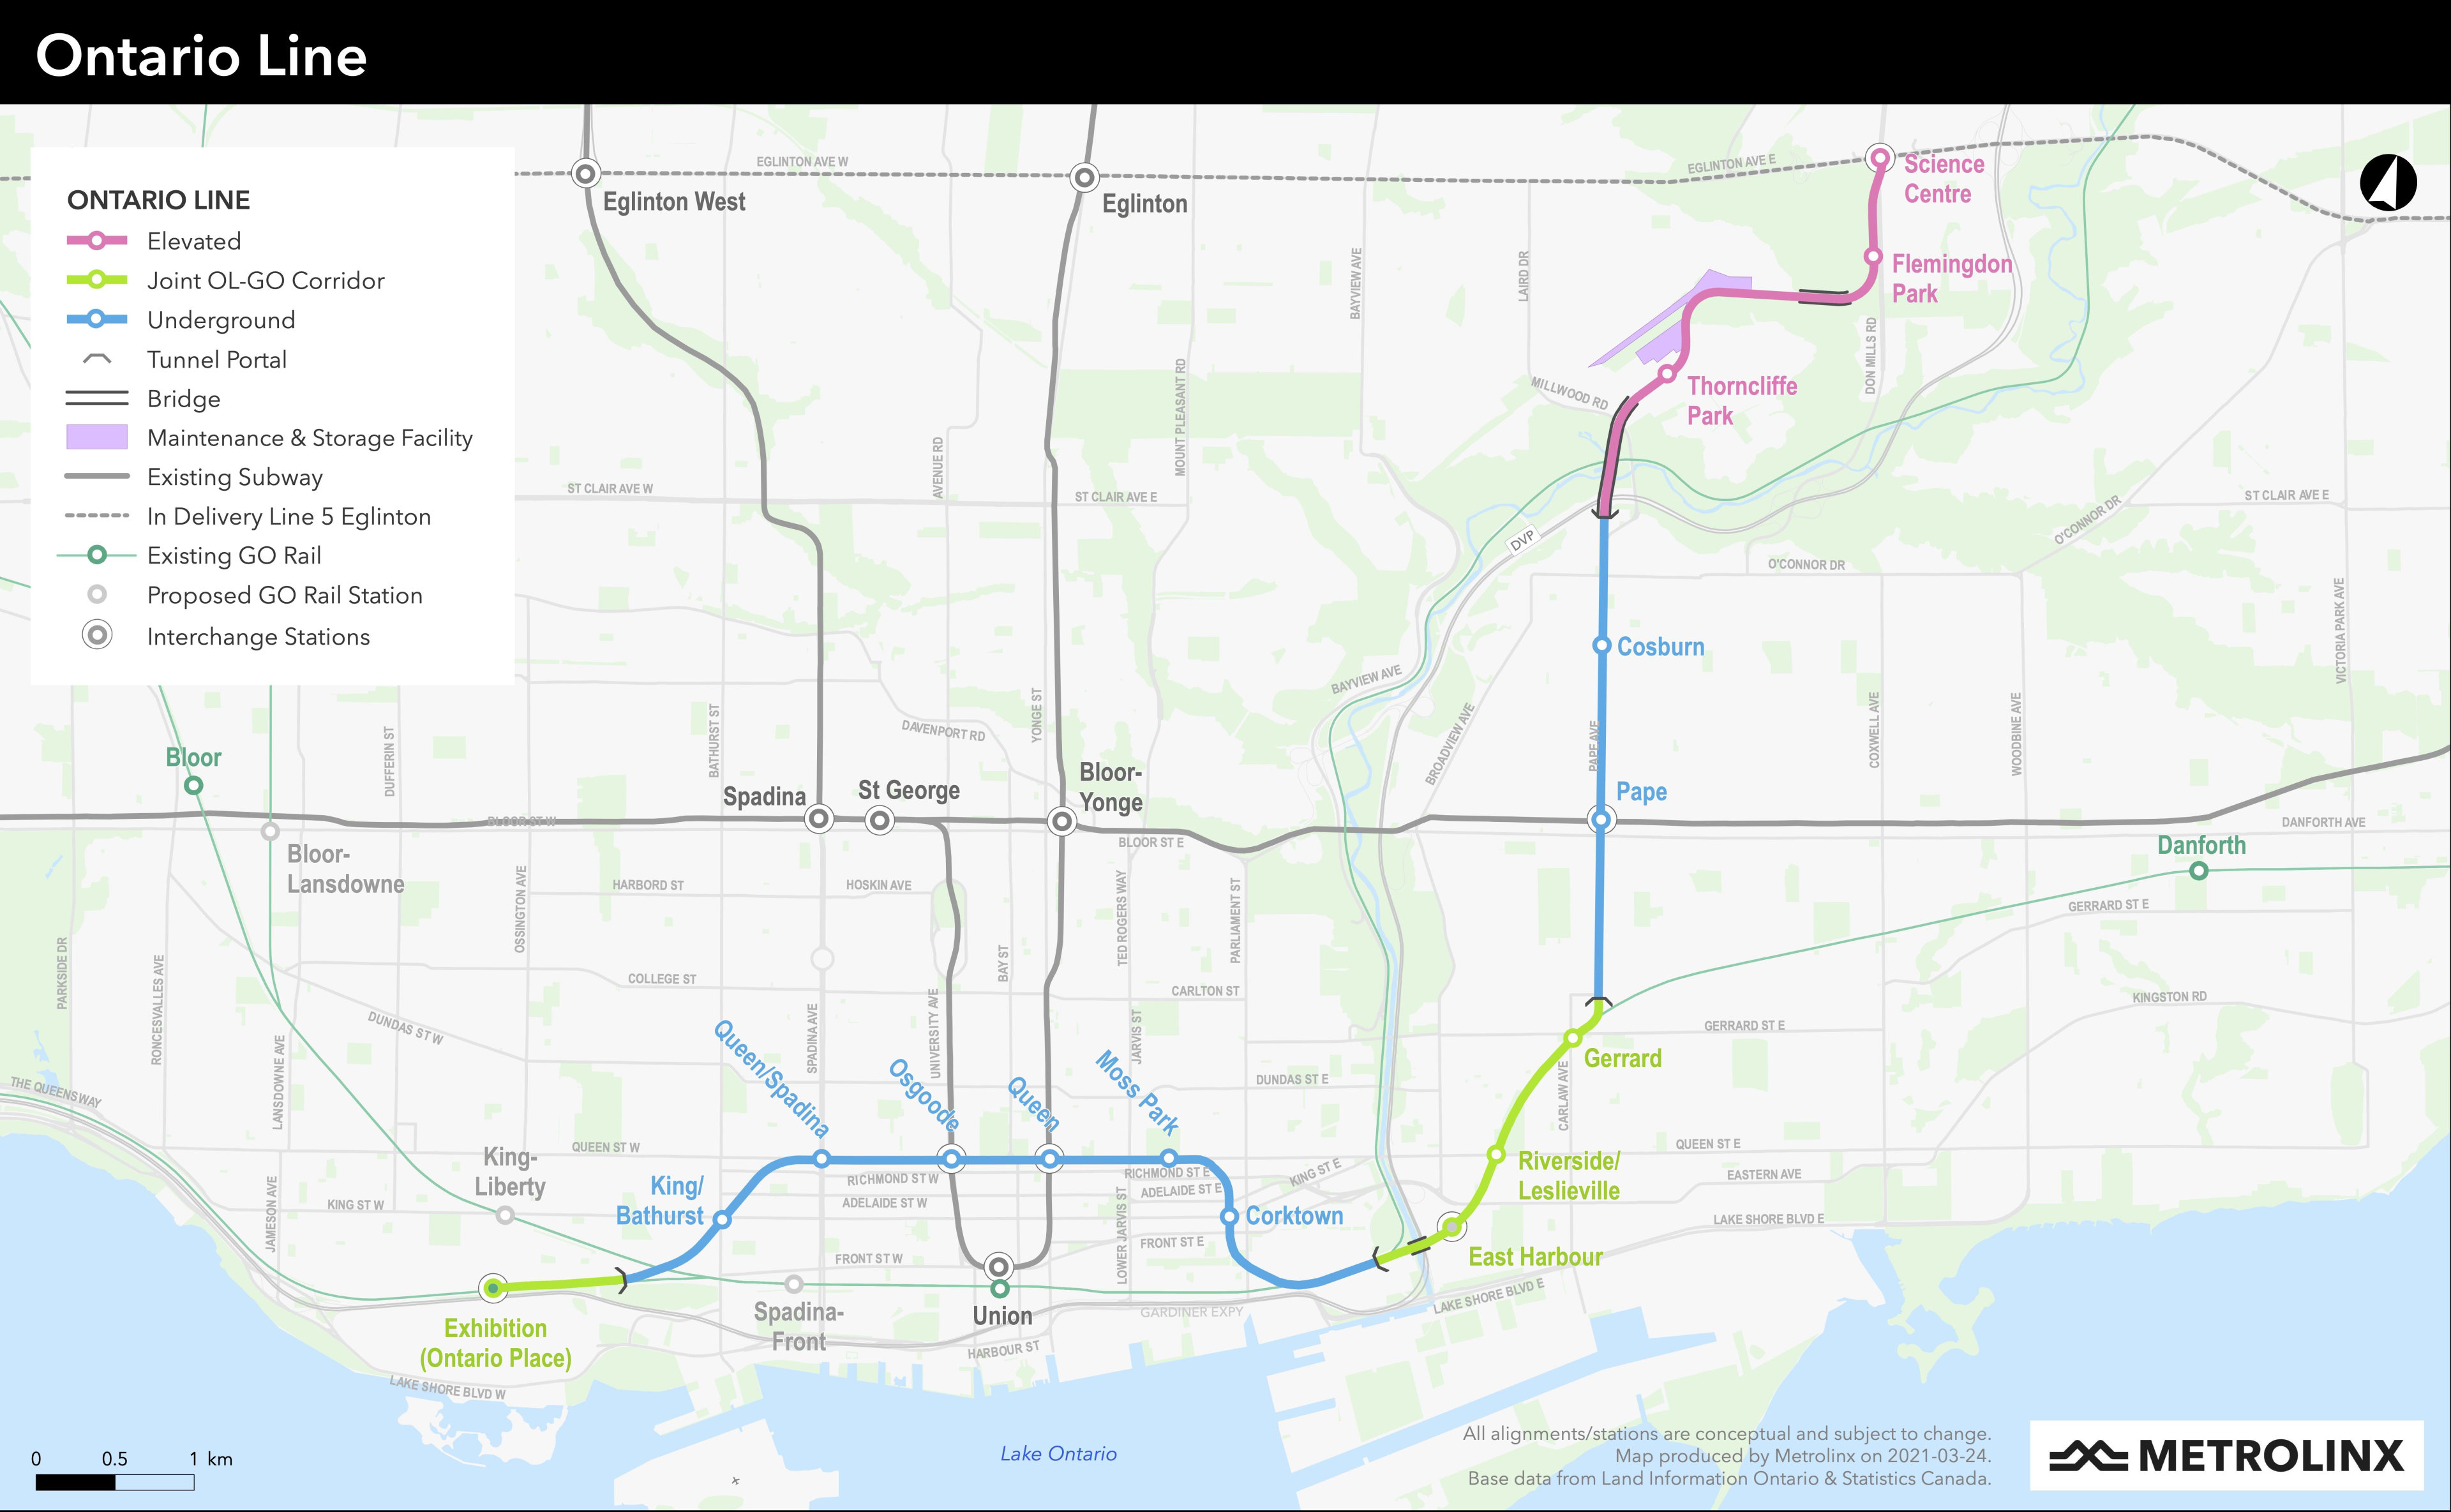 Image of Ontario Line map